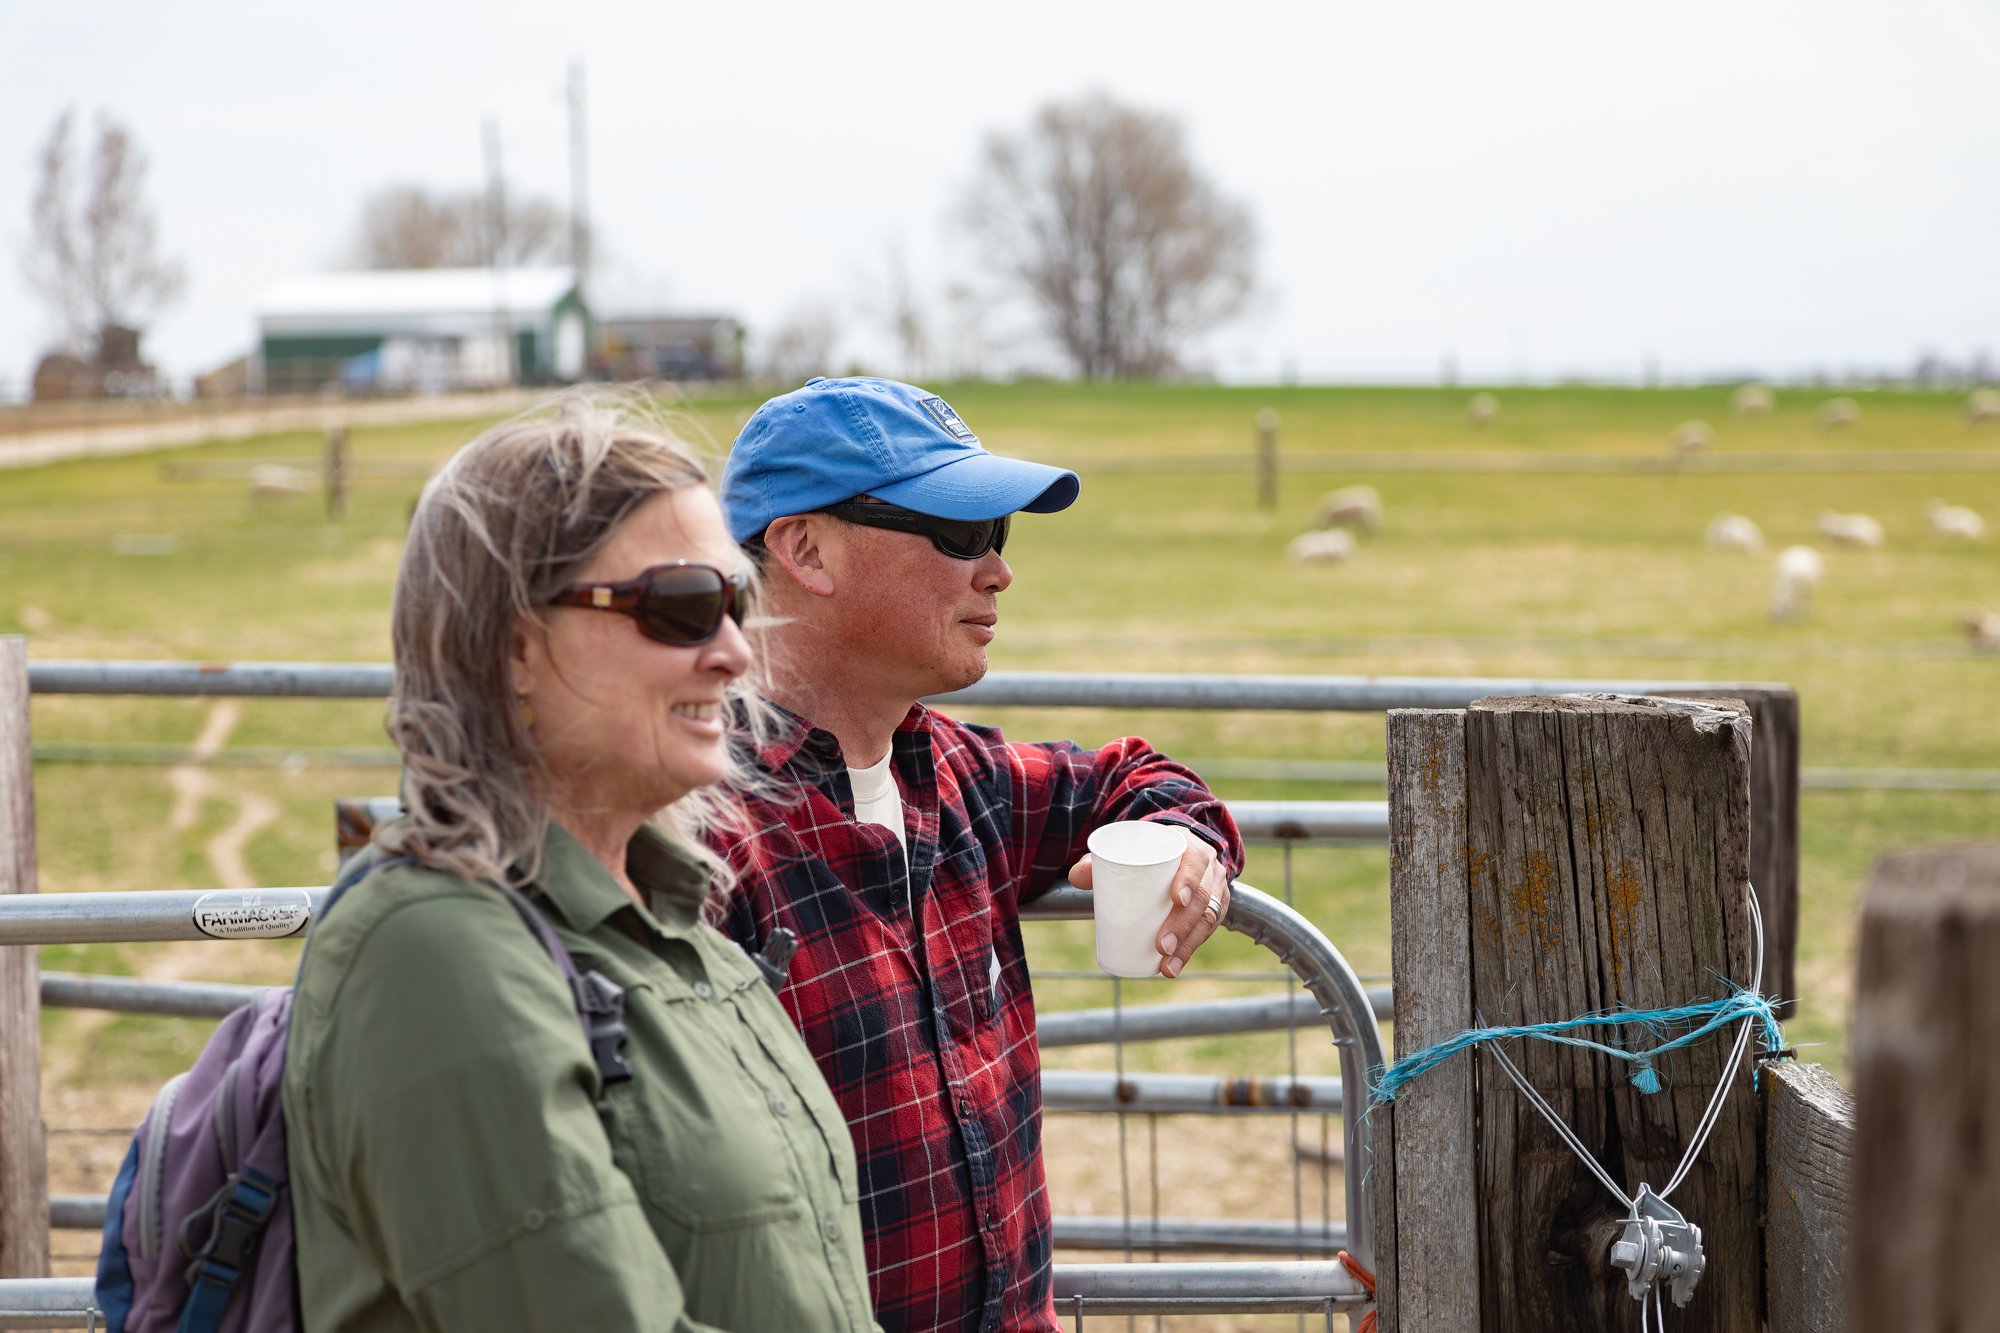 Visitors watch lambs in the corral